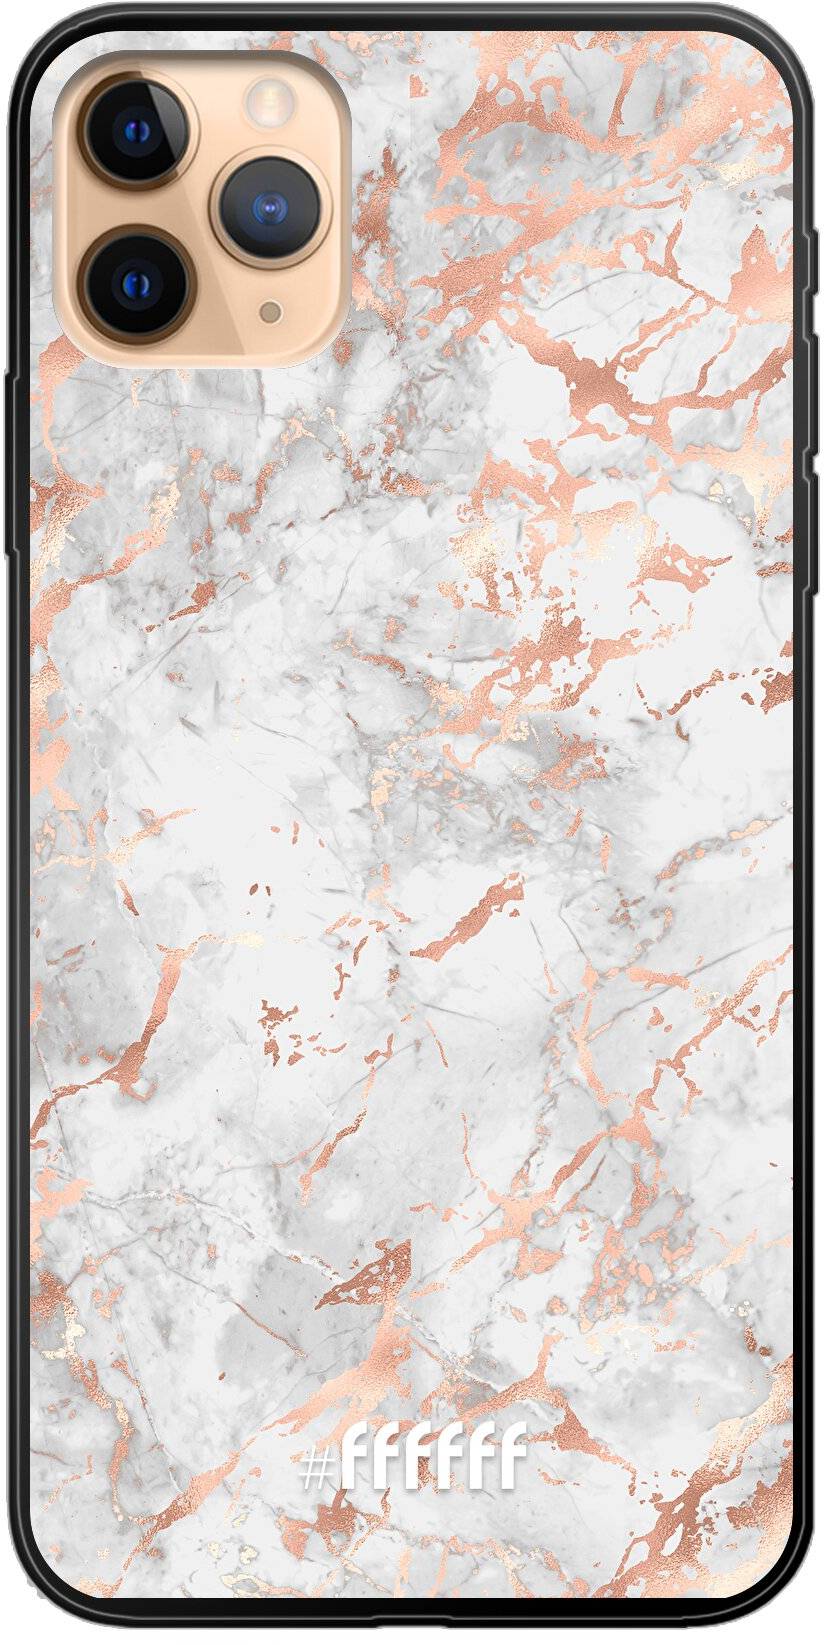 Peachy Marble iPhone 11 Pro Max